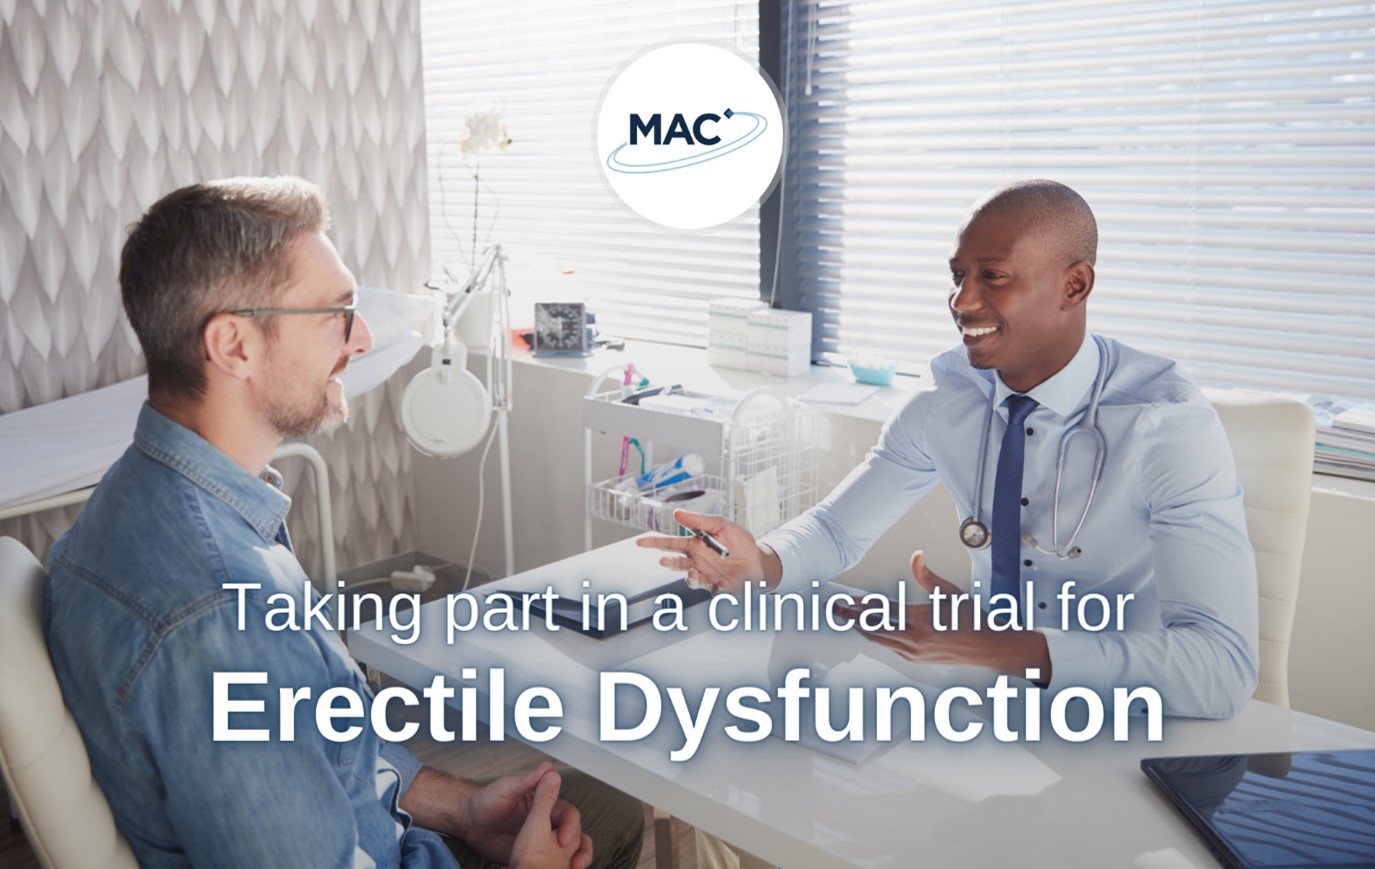 Clinical Trial for Erectile Dysfunction